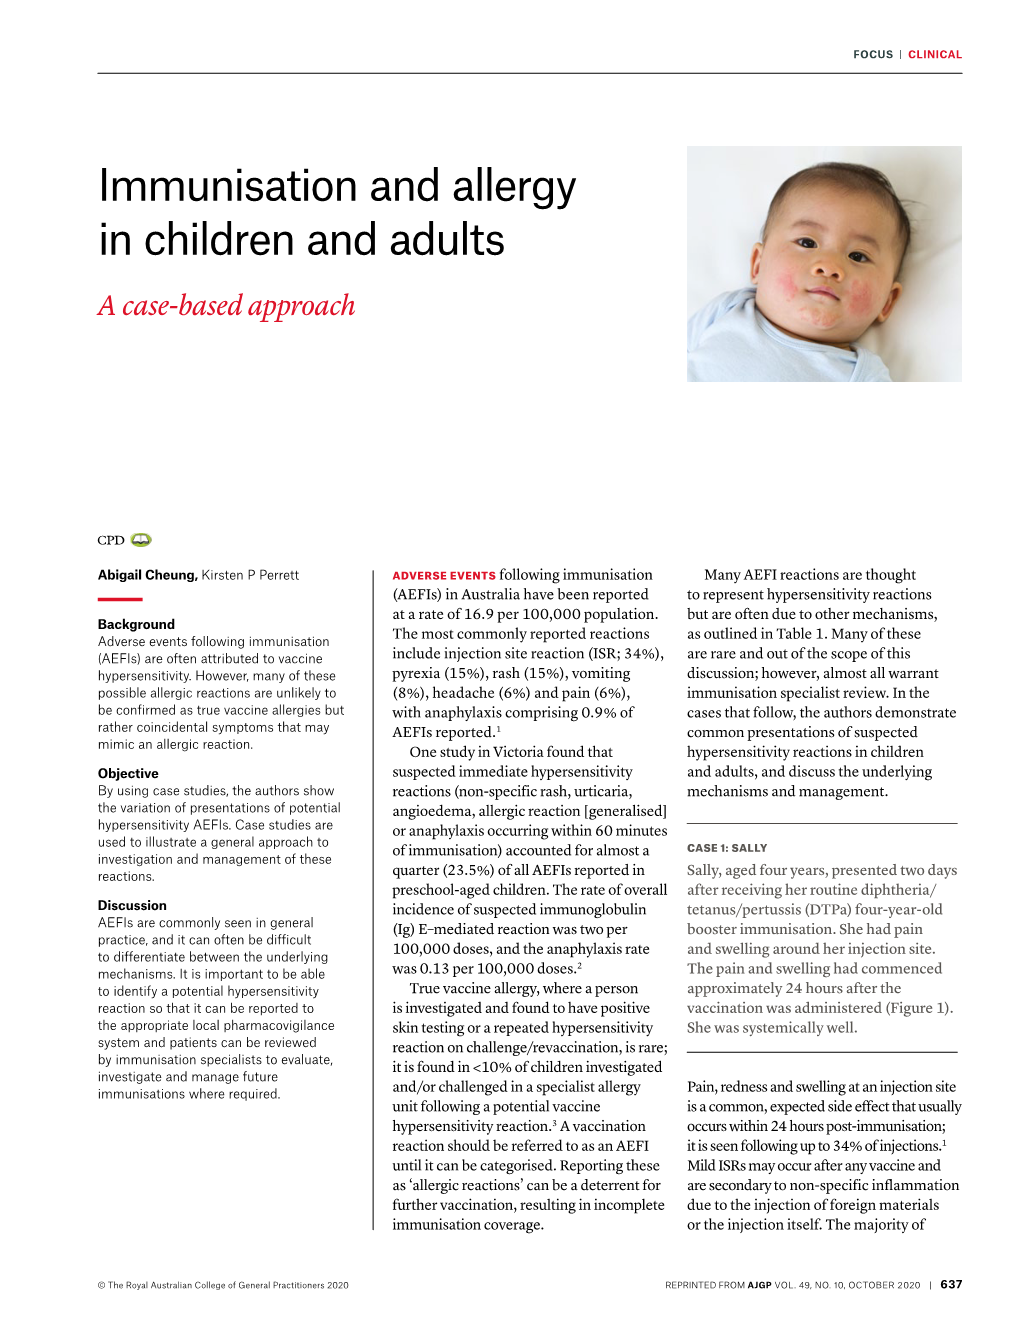 Immunisation and Allergy in Children and Adults